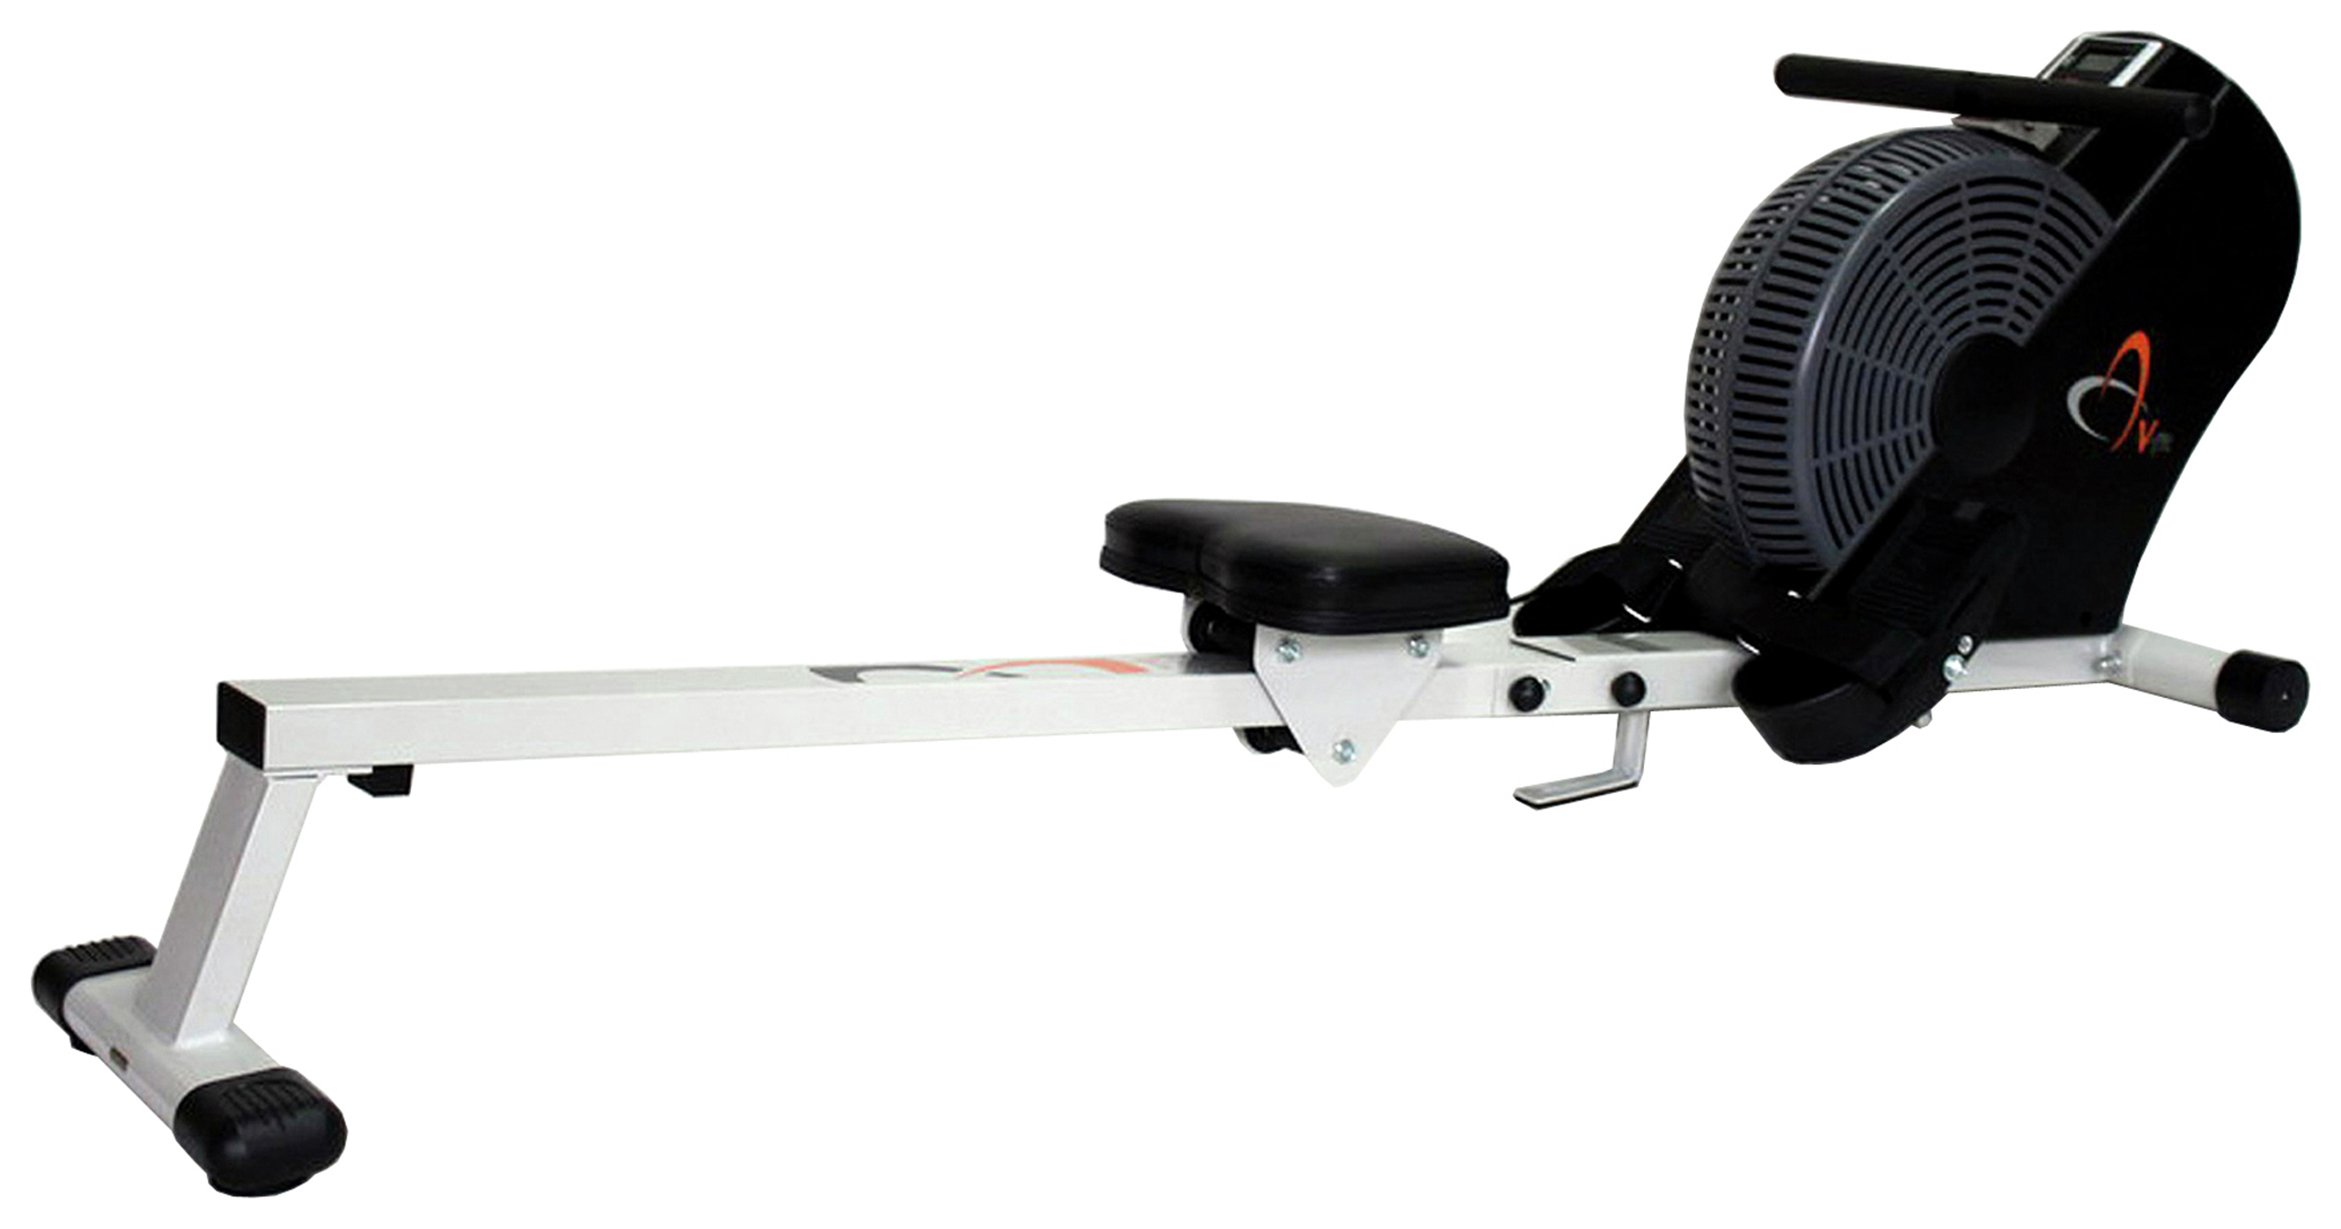 V-fit RO033 Cyclone Air Rower Rowing Machine